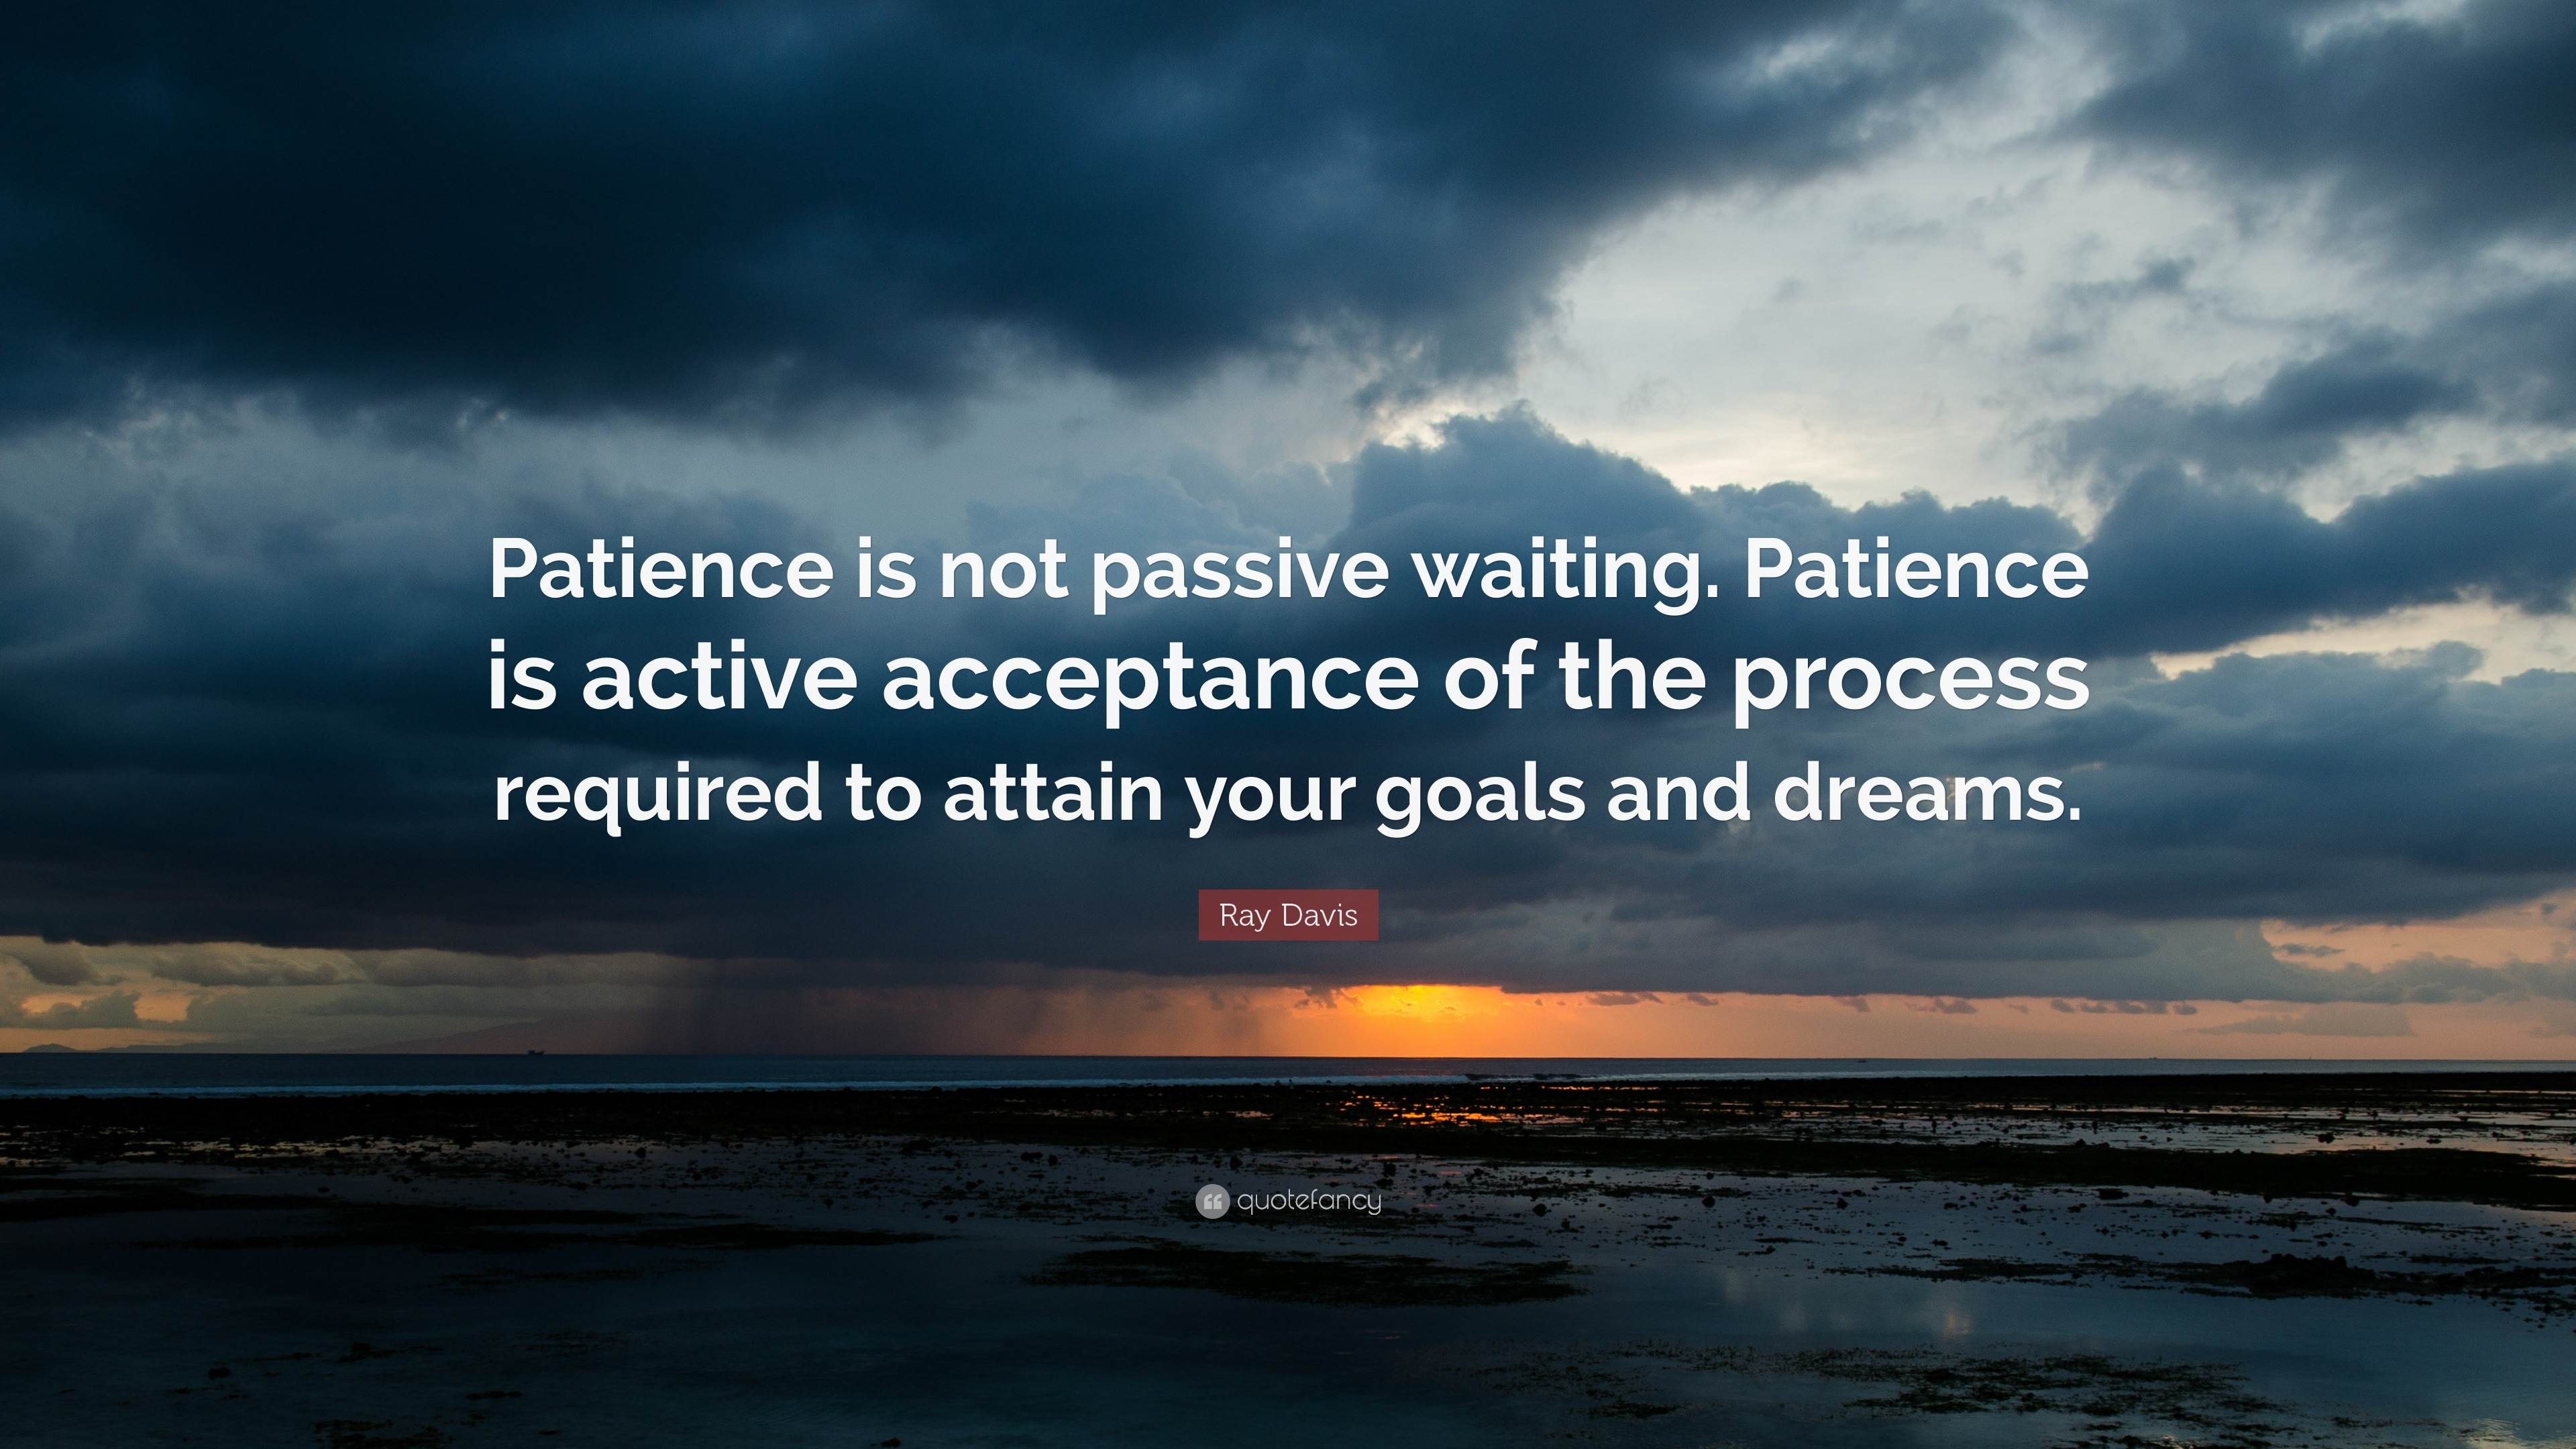 Ray Davis Quote: “Patience is not passive waiting. Patience is active